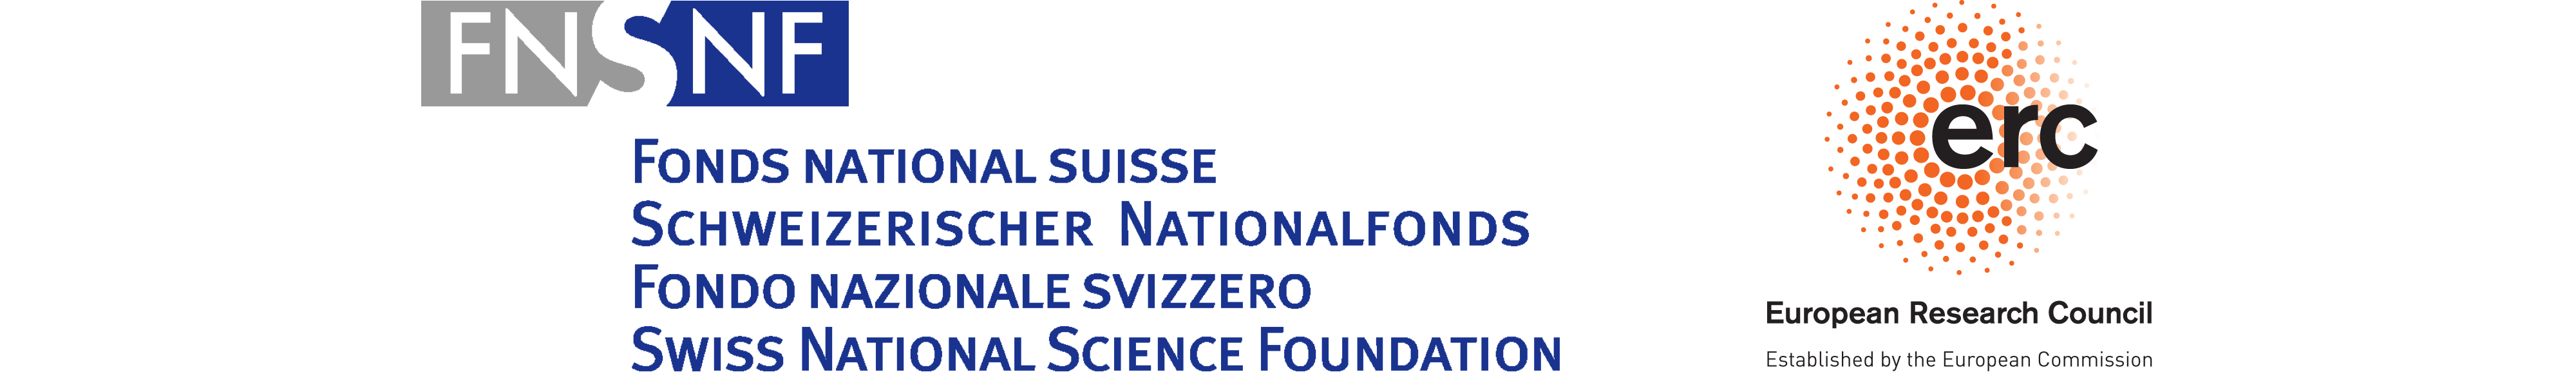 Swiss National Science Foundation Logo / European Research Council Logo